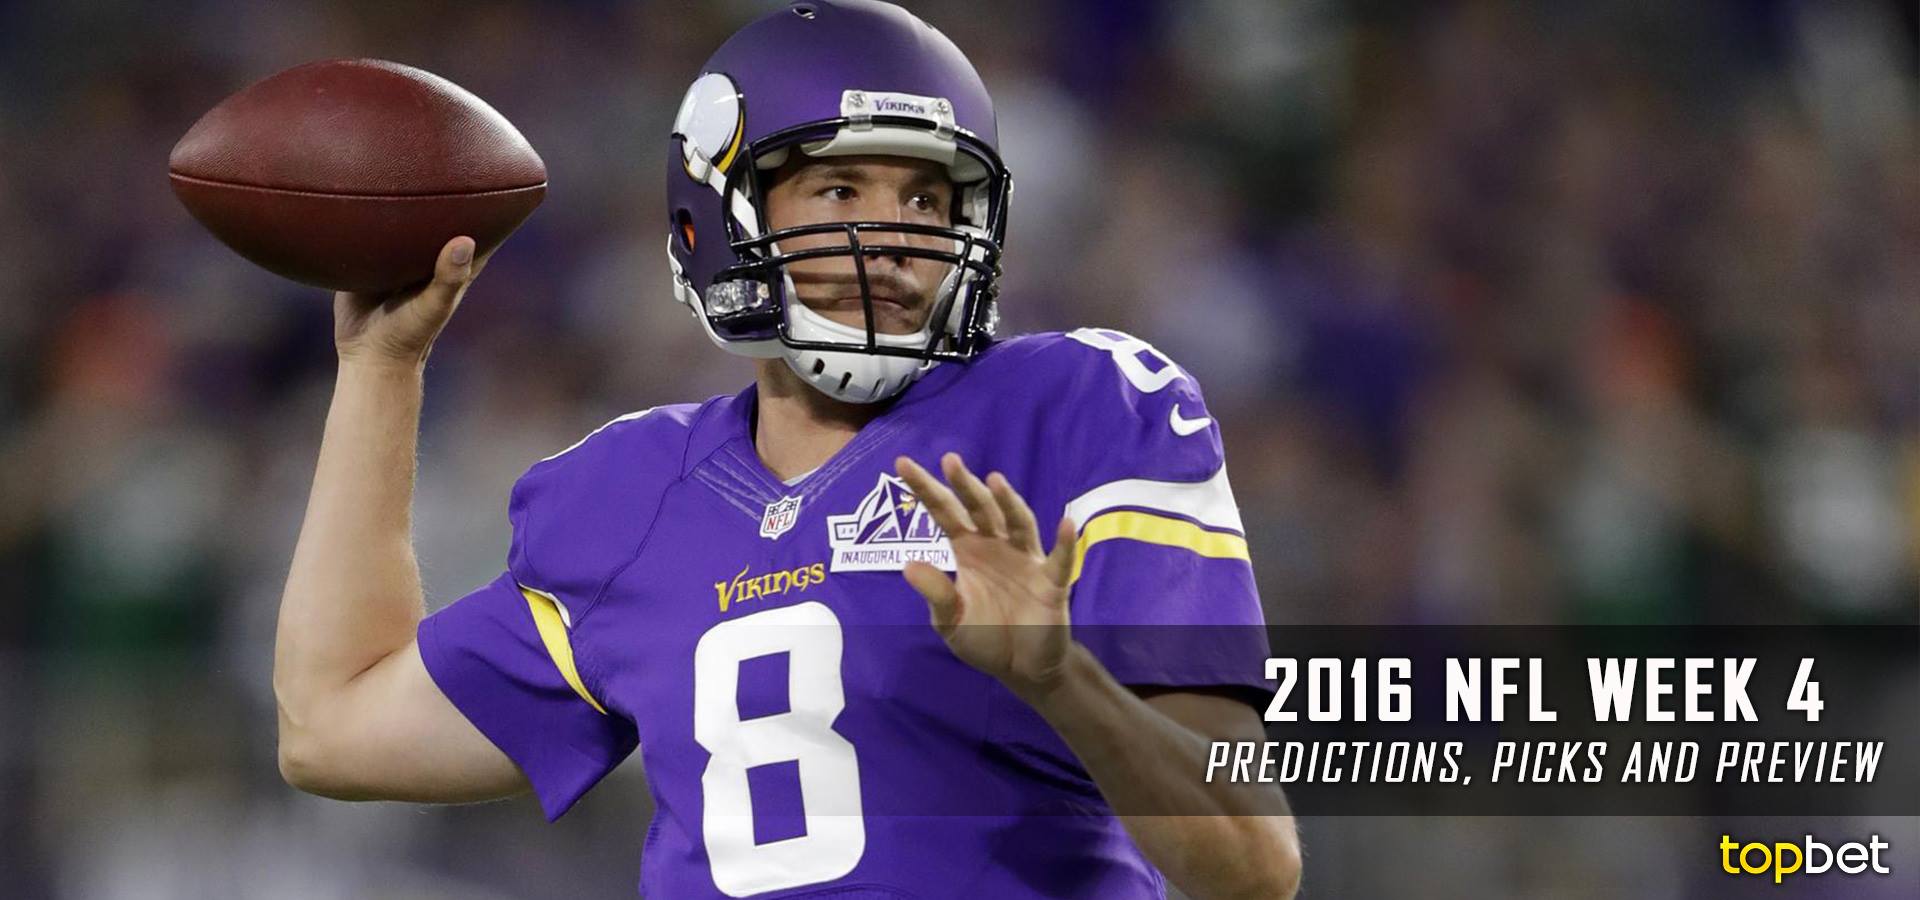 2016 NFL Week 4 Predictions, Picks and Preview